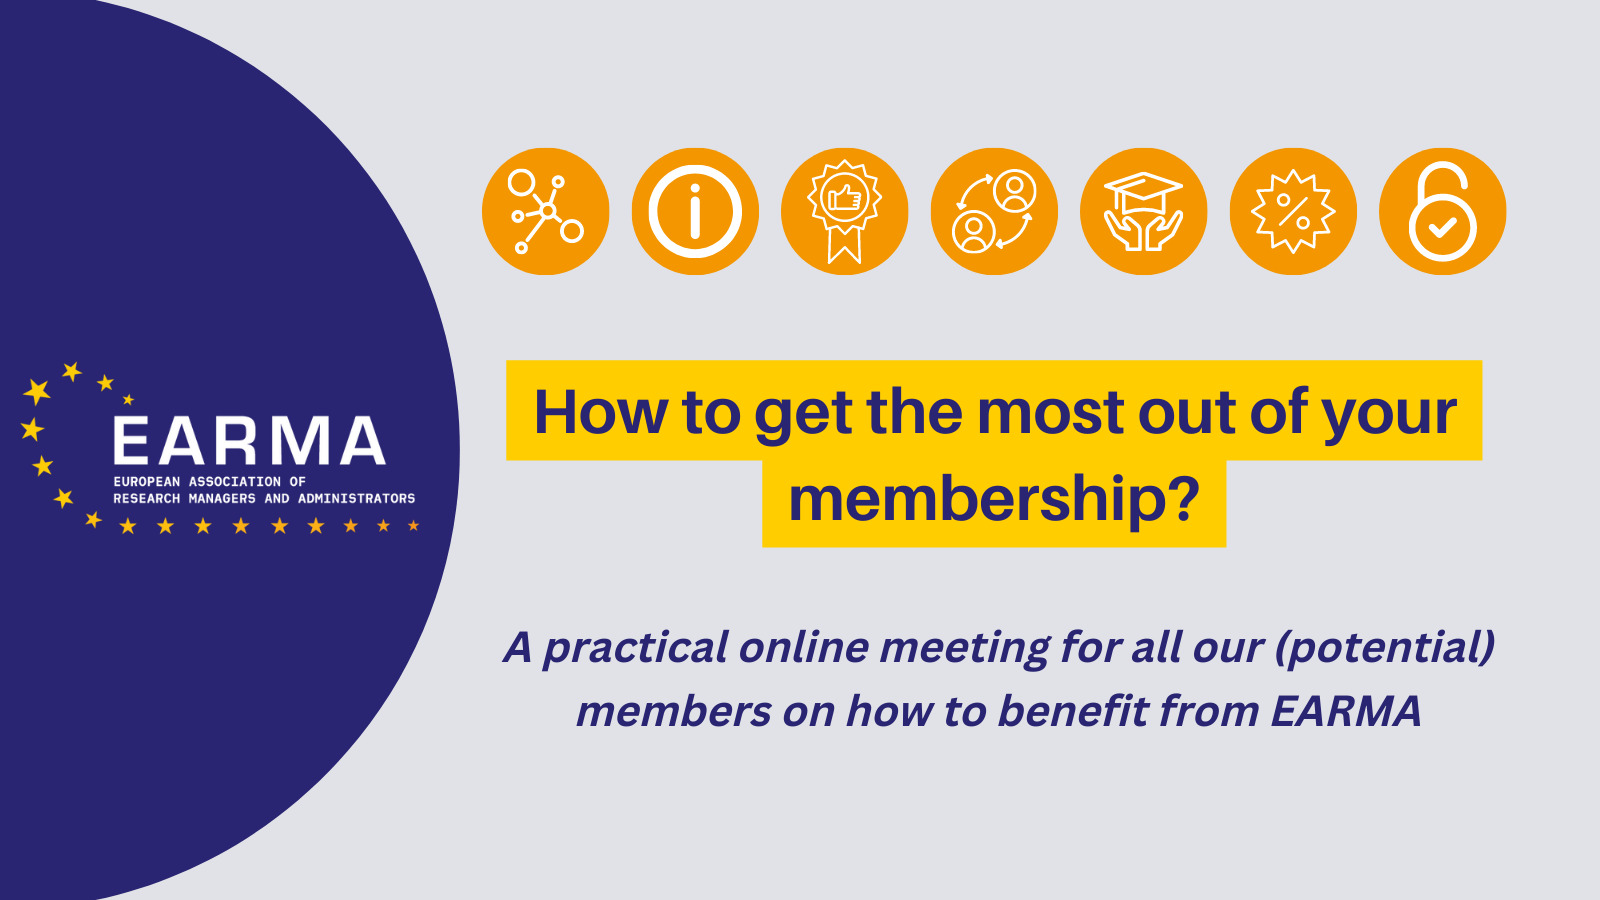 How to get the most out of your membership?